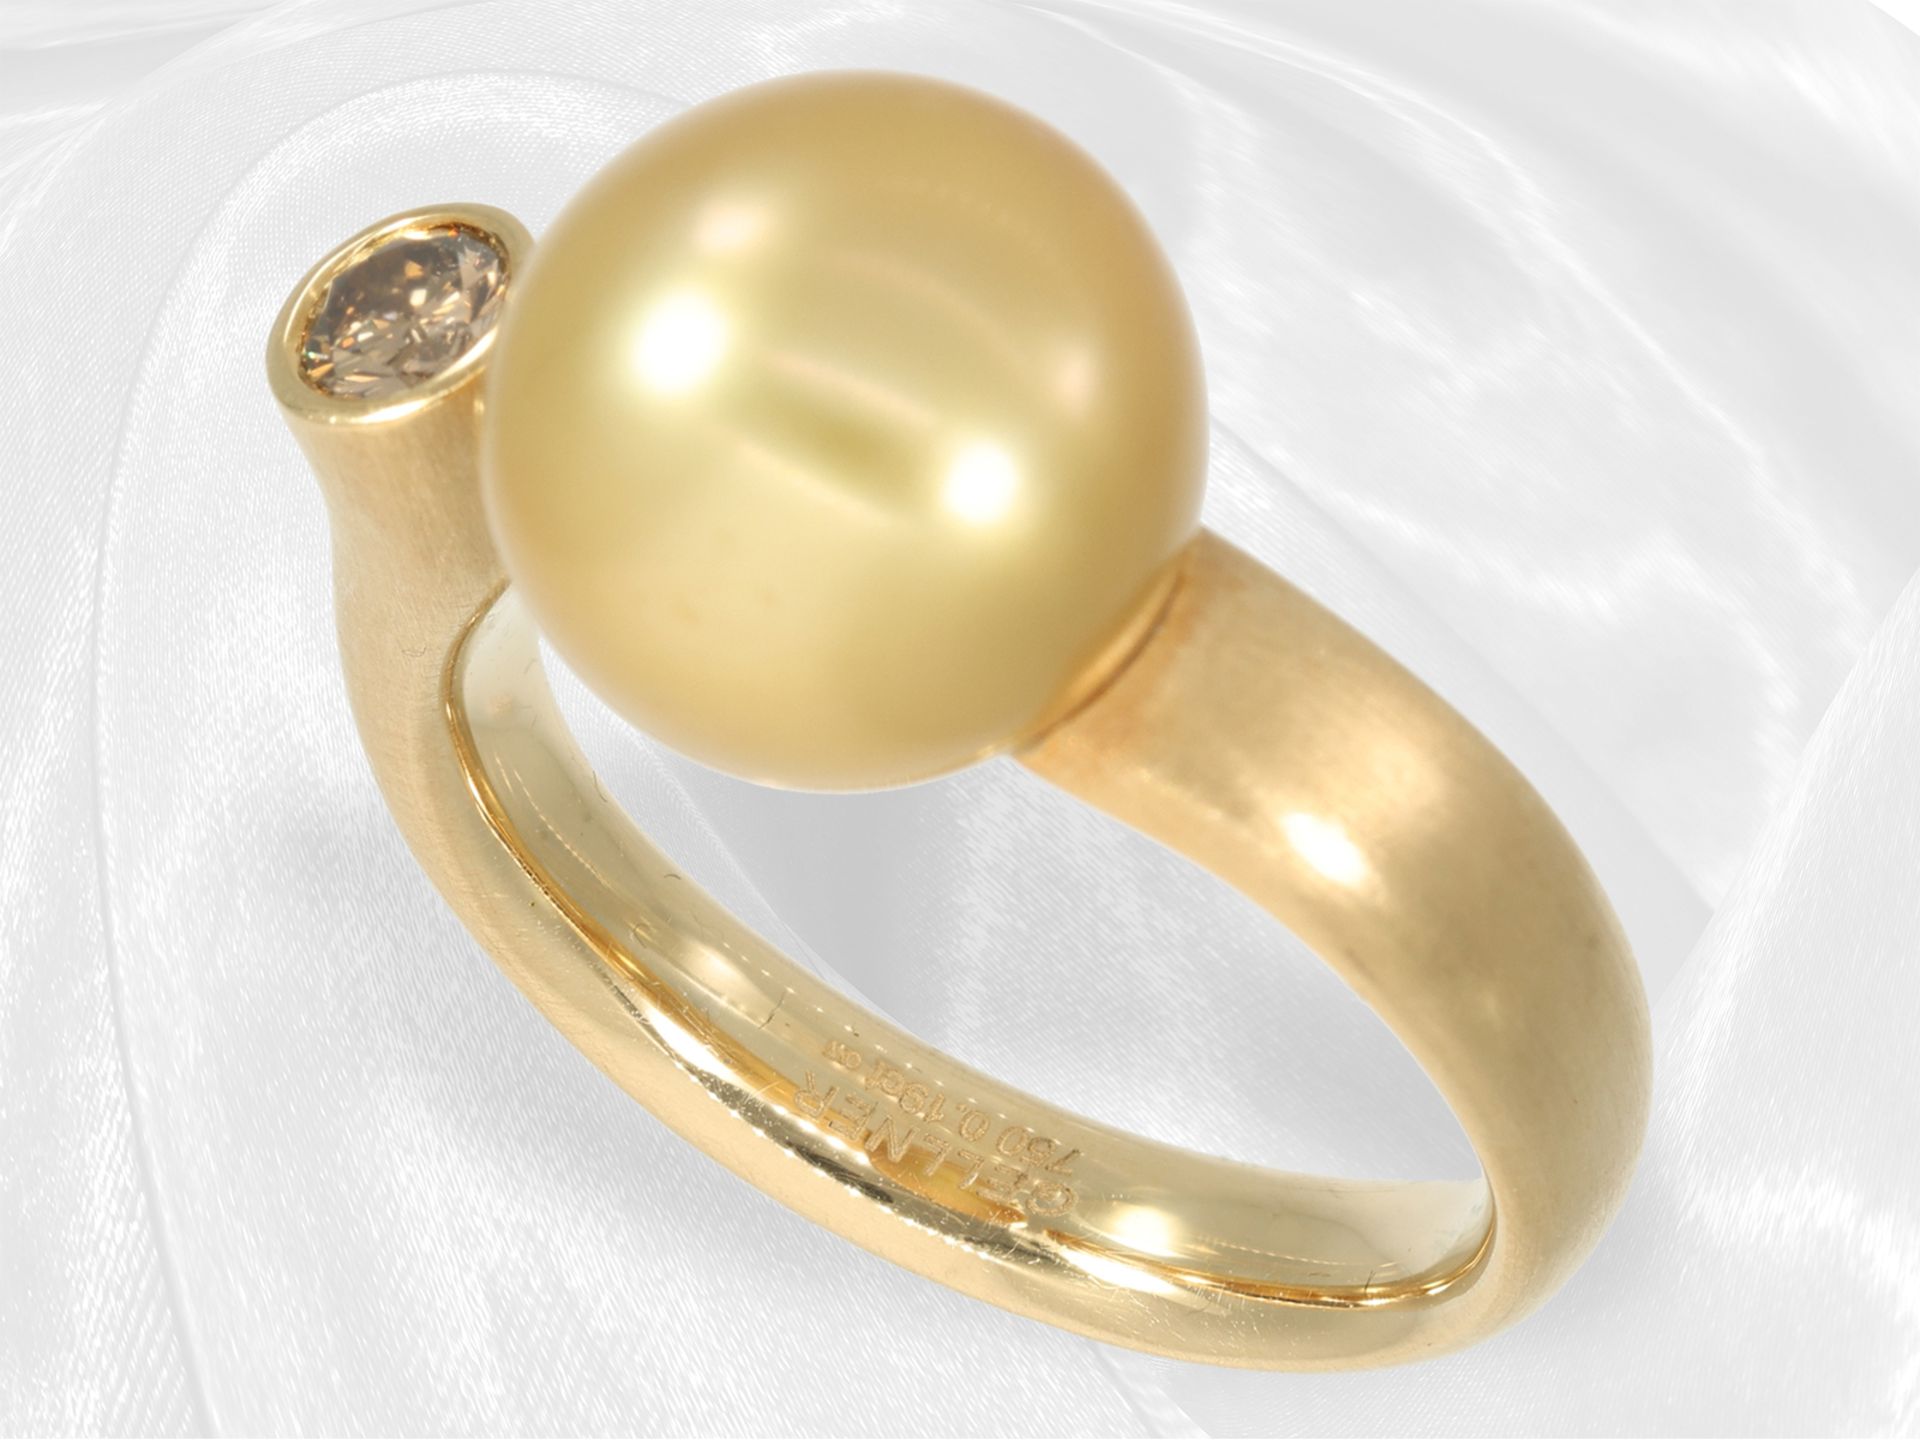 Elaborately crafted, high-quality designer ladies' ring with finest South Sea pearl and fancy diamon - Image 10 of 10